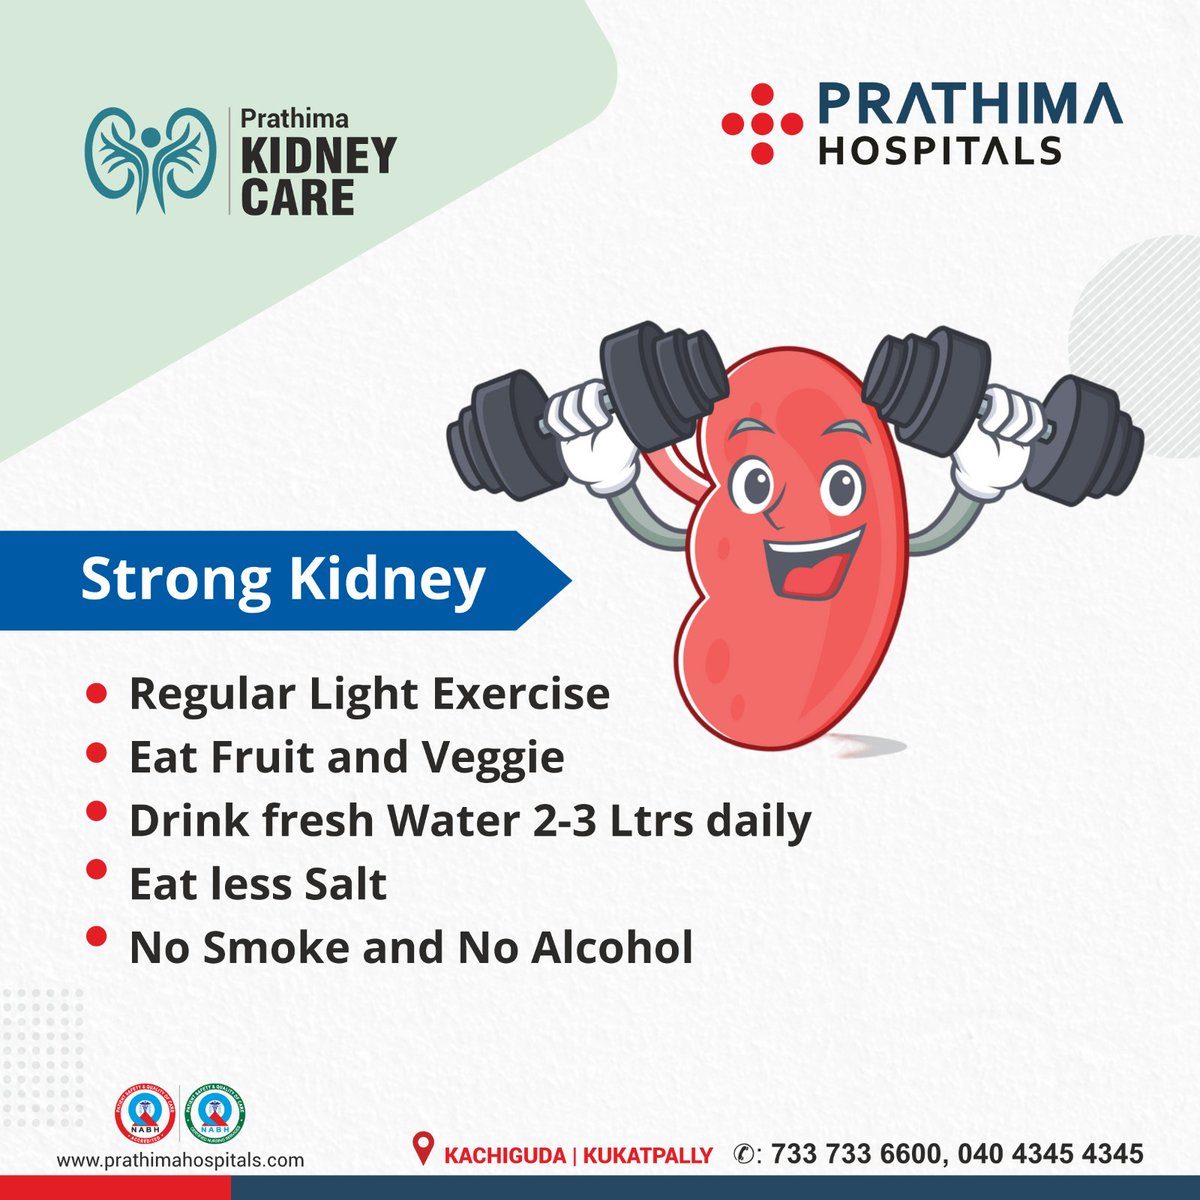 Strong Kidney
• Regular Light Exercise
• Eat Fruit and Veggie
• Drink fresh Water 2-3 Ltrs daily
• Eat less Salt
• No Smoke and No Alcohol

#prathimahospitals #prathima #PH #healthawareness #kidneyhealth #nephro #kidneyhealthawareness #nephrology  #bestkidneyhospital